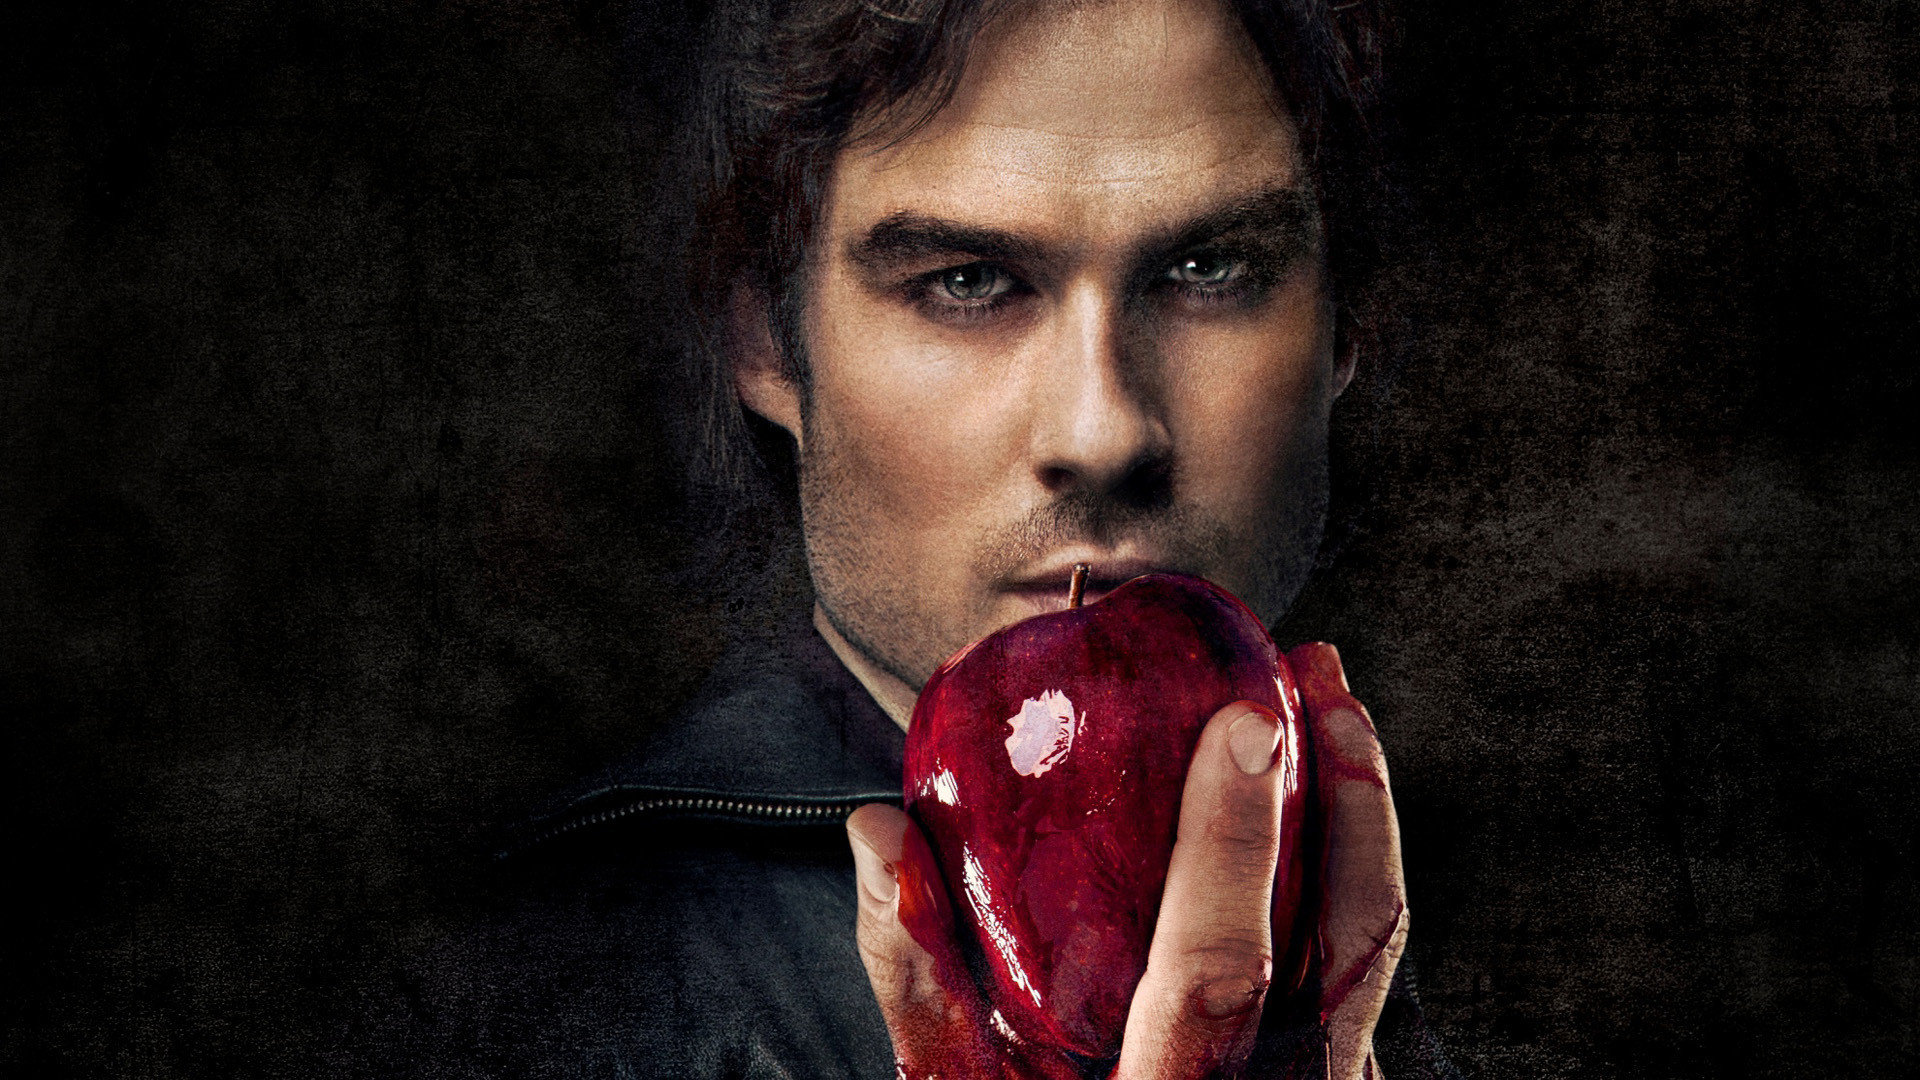 Awesome The Vampire Diaries free wallpaper ID:464977 for full hd 1920x1080 desktop